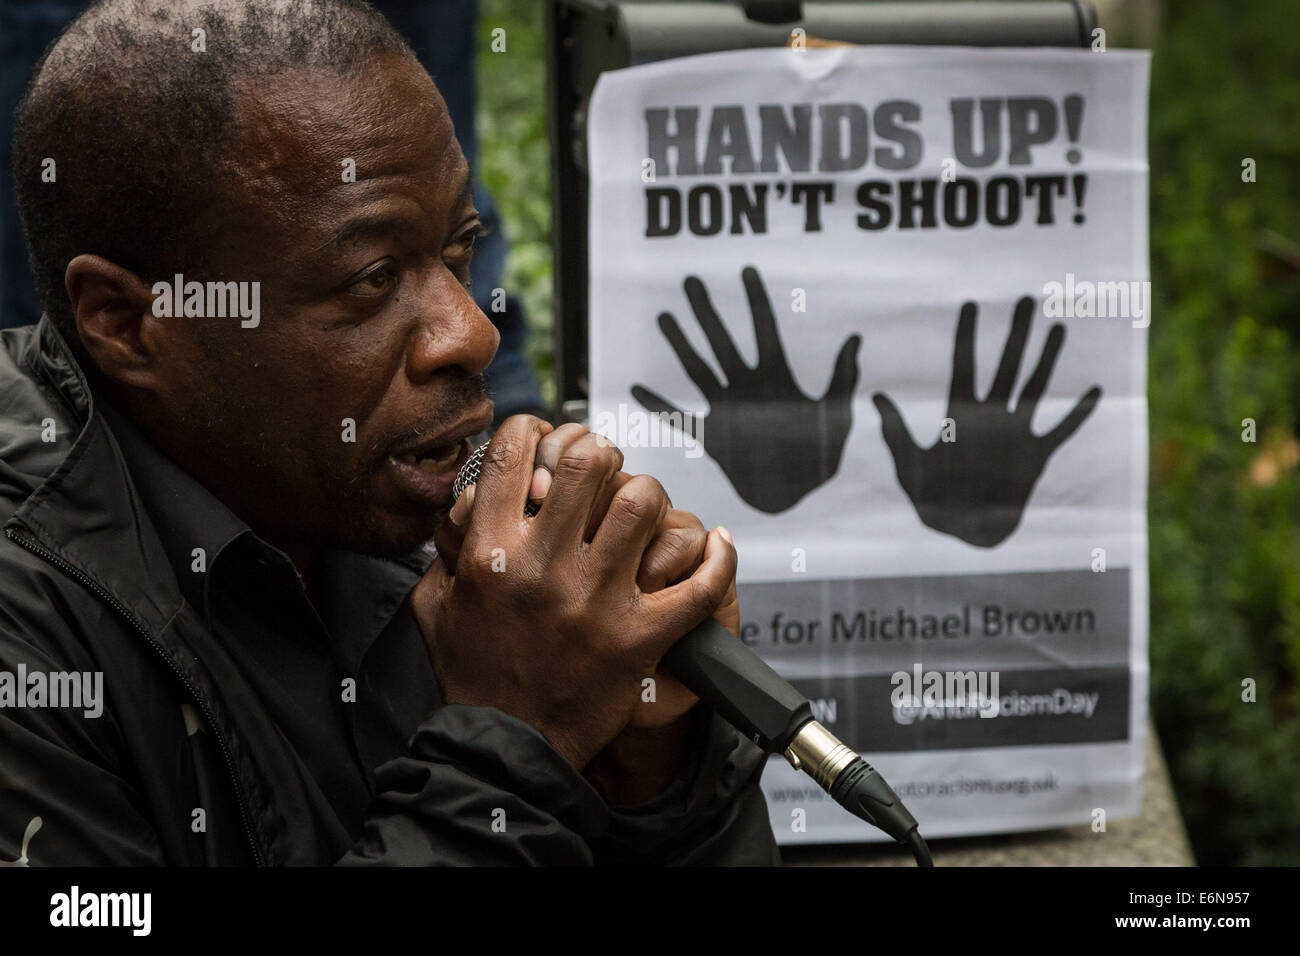 London, UK. 27th August, 2014. ‘Hands Up Don’t Shoot!’ protesters and supporters from Stand Up To Racism protest outside the US Embassy in London in solidarity for the recent death of Michael Brown. On August 9, 2014, Michael Brown Jr., an 18-year-old African American man, was fatally shot by 28-year-old white Ferguson police officer Darren Wilson in the city of Ferguson, Missouri, US. Credit: Guy Corbishley/Alamy Live News Stock Photo